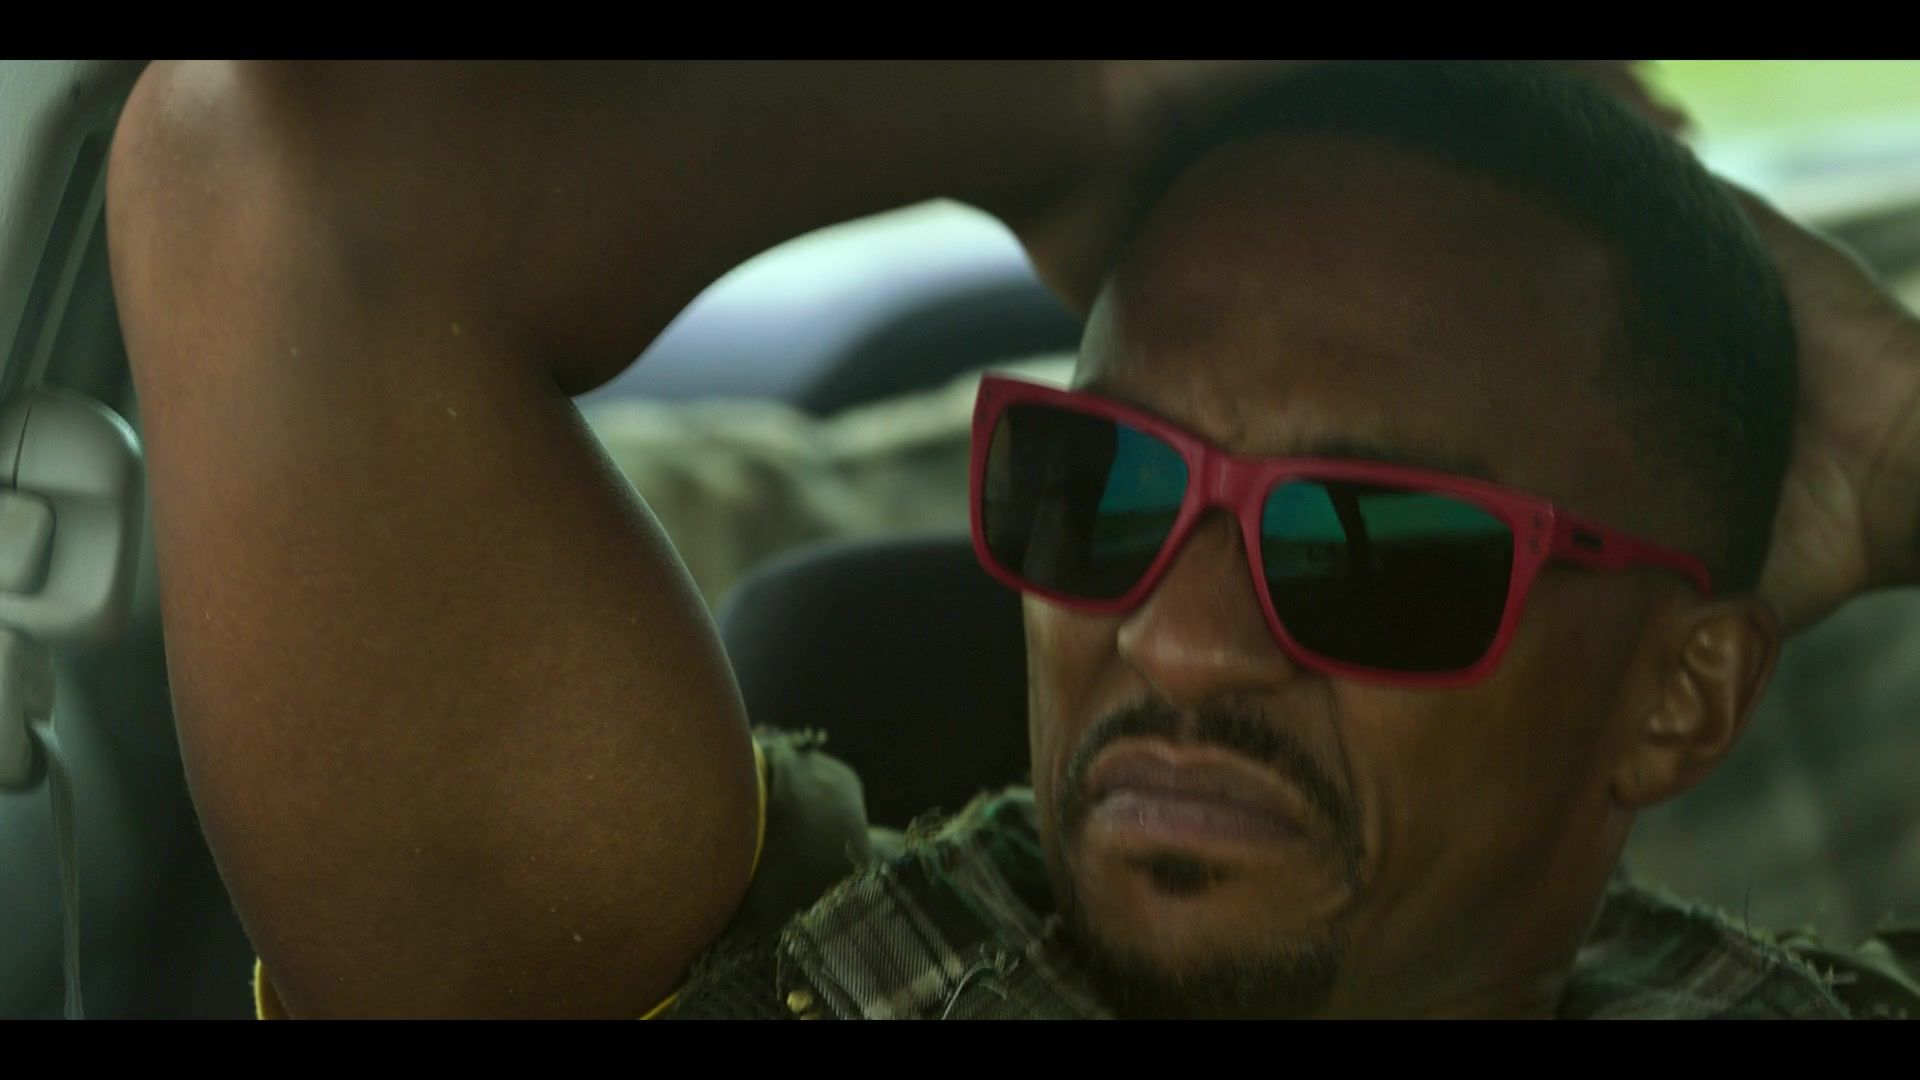 Worn on Twisted Metal TV Show - Red Frame Sunglasses Worn by Anthony Mackie as John Doe